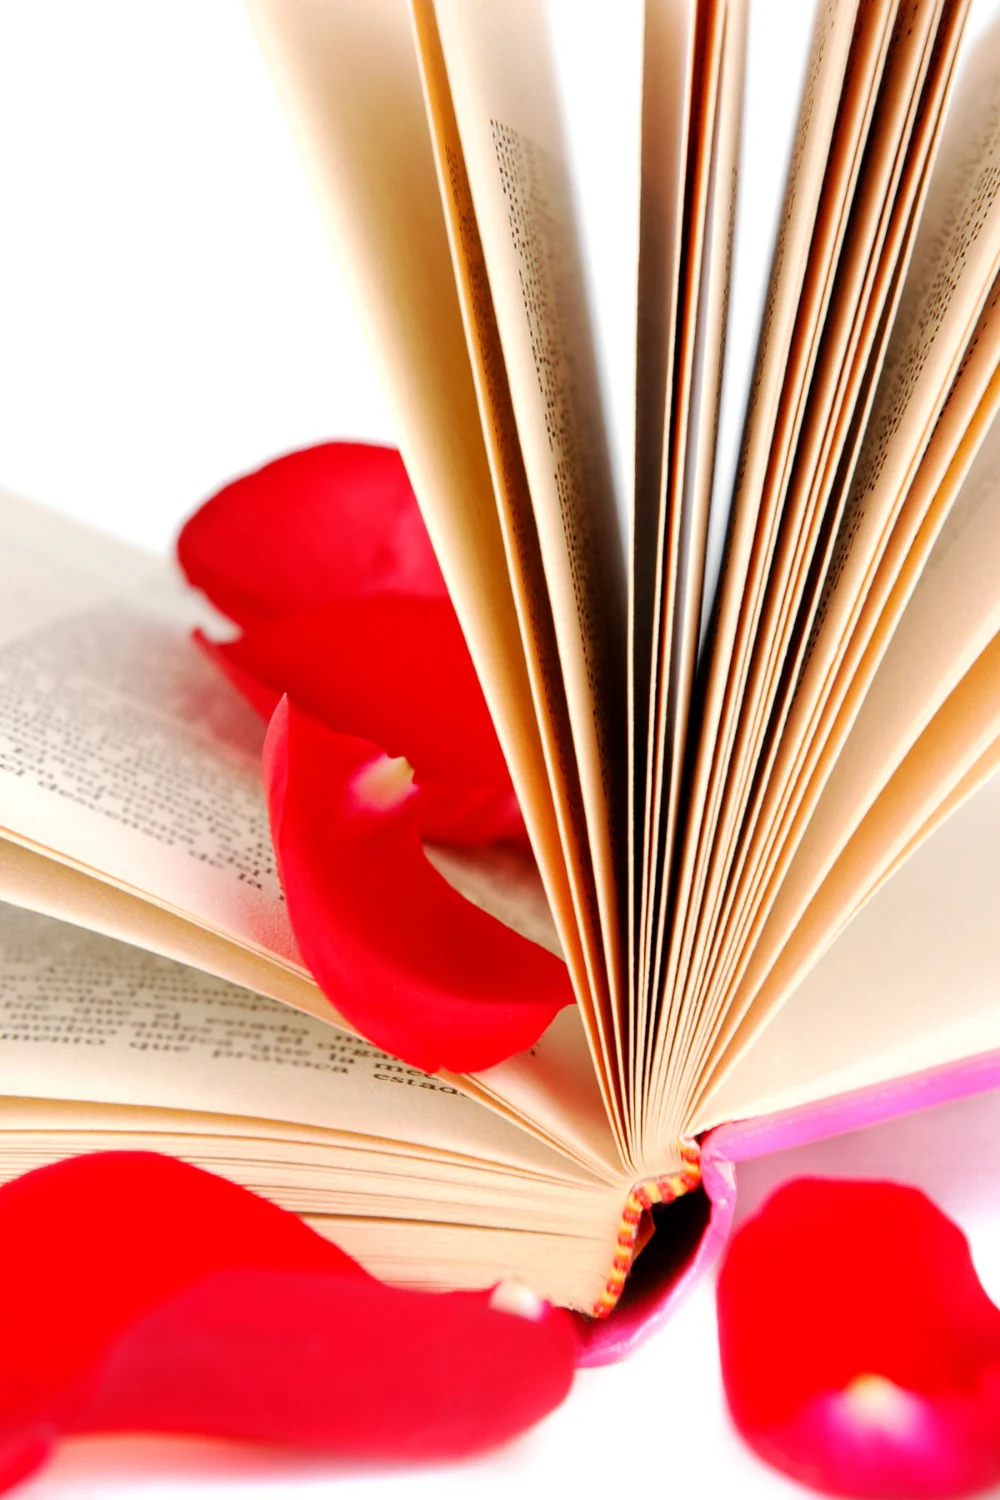 teen romance book with red flower petals